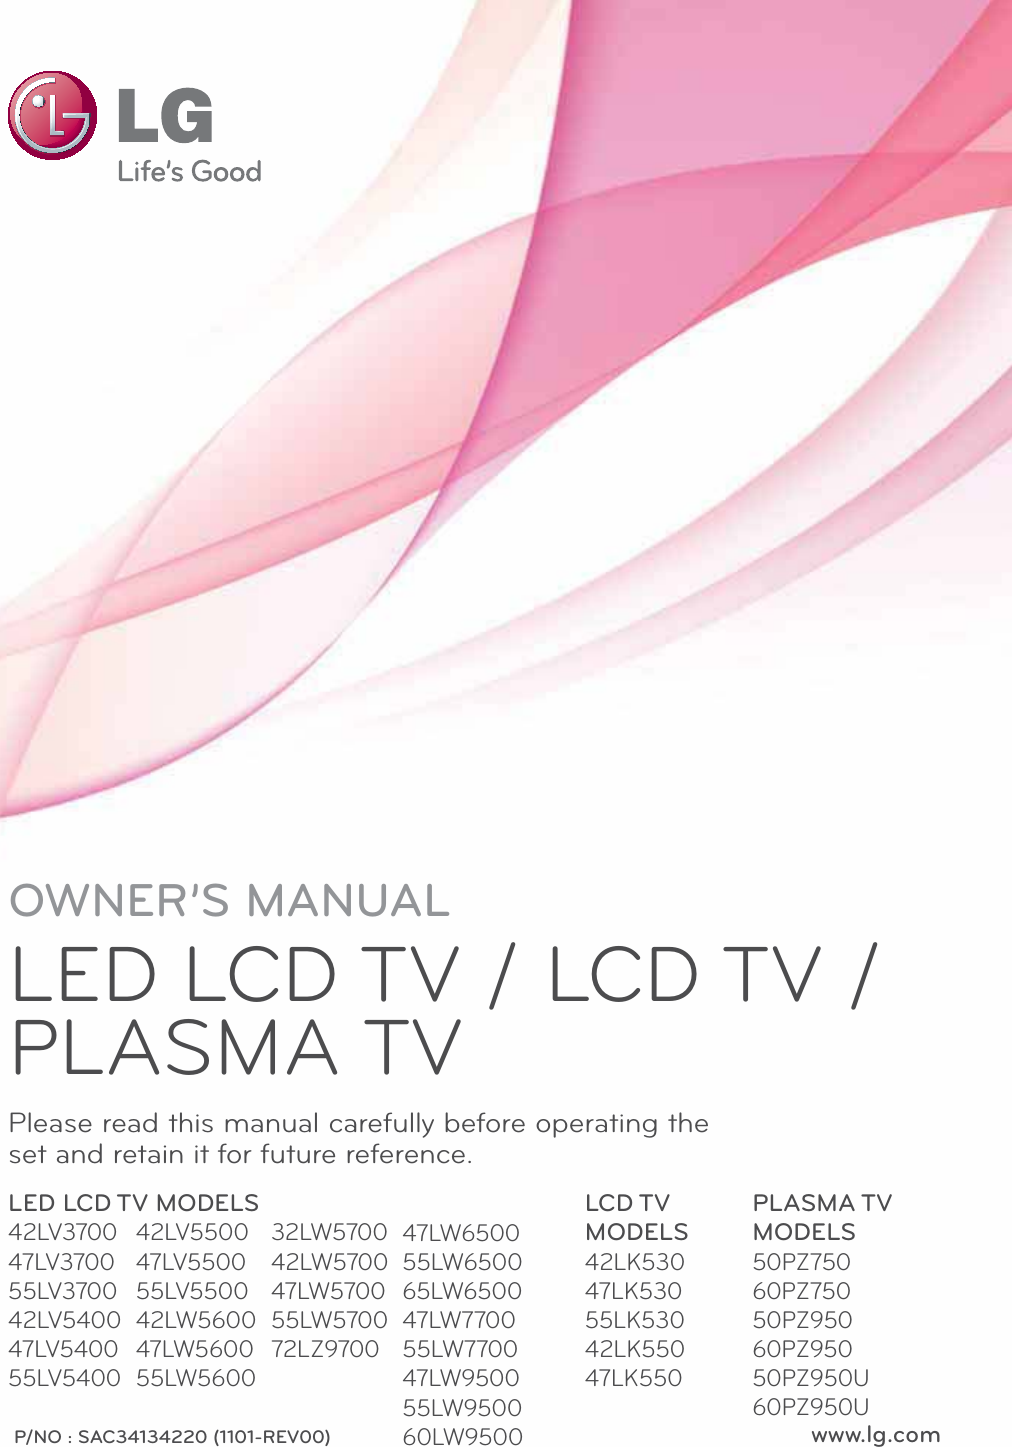 www.lg.comP/NO : SAC34134220 (1101-REV00)OWNER’S MANUALLED LCD TV / LCD TV / PLASMA TVPlease read this manual carefully before operating the set and retain it for future reference.LED LCD TV MODELS42LV370047LV370055LV370042LV540047LV540055LV5400LCD TV MODELS42LK53047LK53055LK53042LK55047LK550PLASMA TV MODELS50PZ75060PZ75050PZ95060PZ95050PZ950U60PZ950U42LV550047LV550055LV550042LW560047LW560055LW560032LW570042LW570047LW570055LW570072LZ970047LW650055LW650065LW650047LW770055LW770047LW950055LW950060LW9500